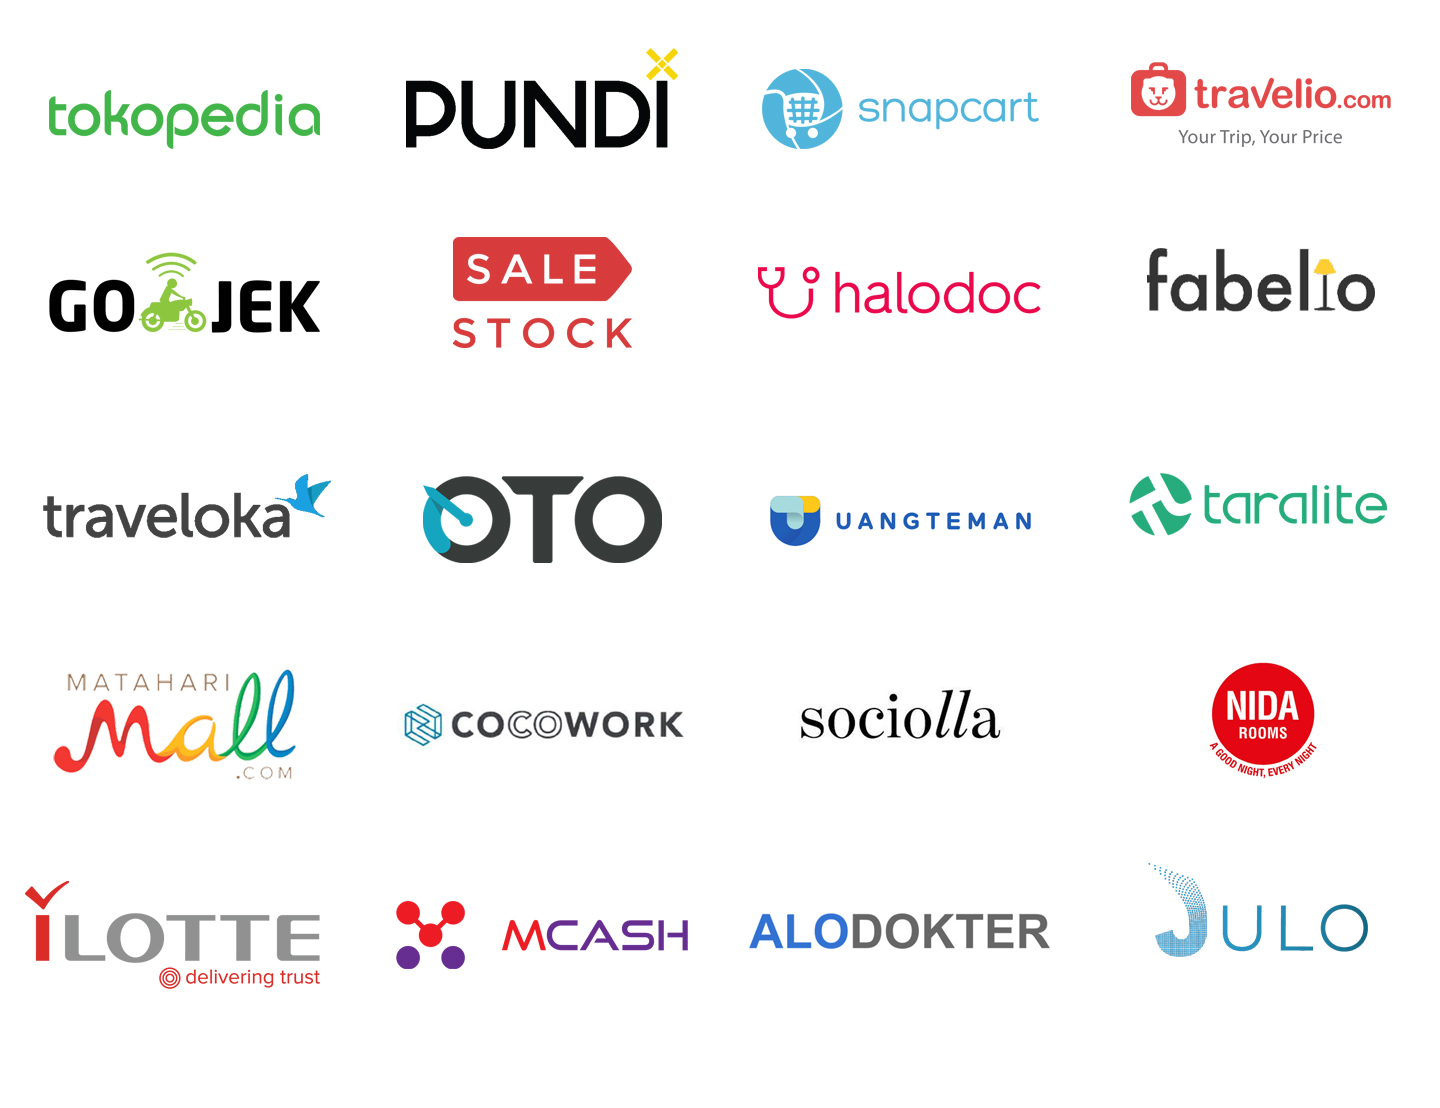 Meet the 20 top-funded startups and tech companies in Indonesia - Top4